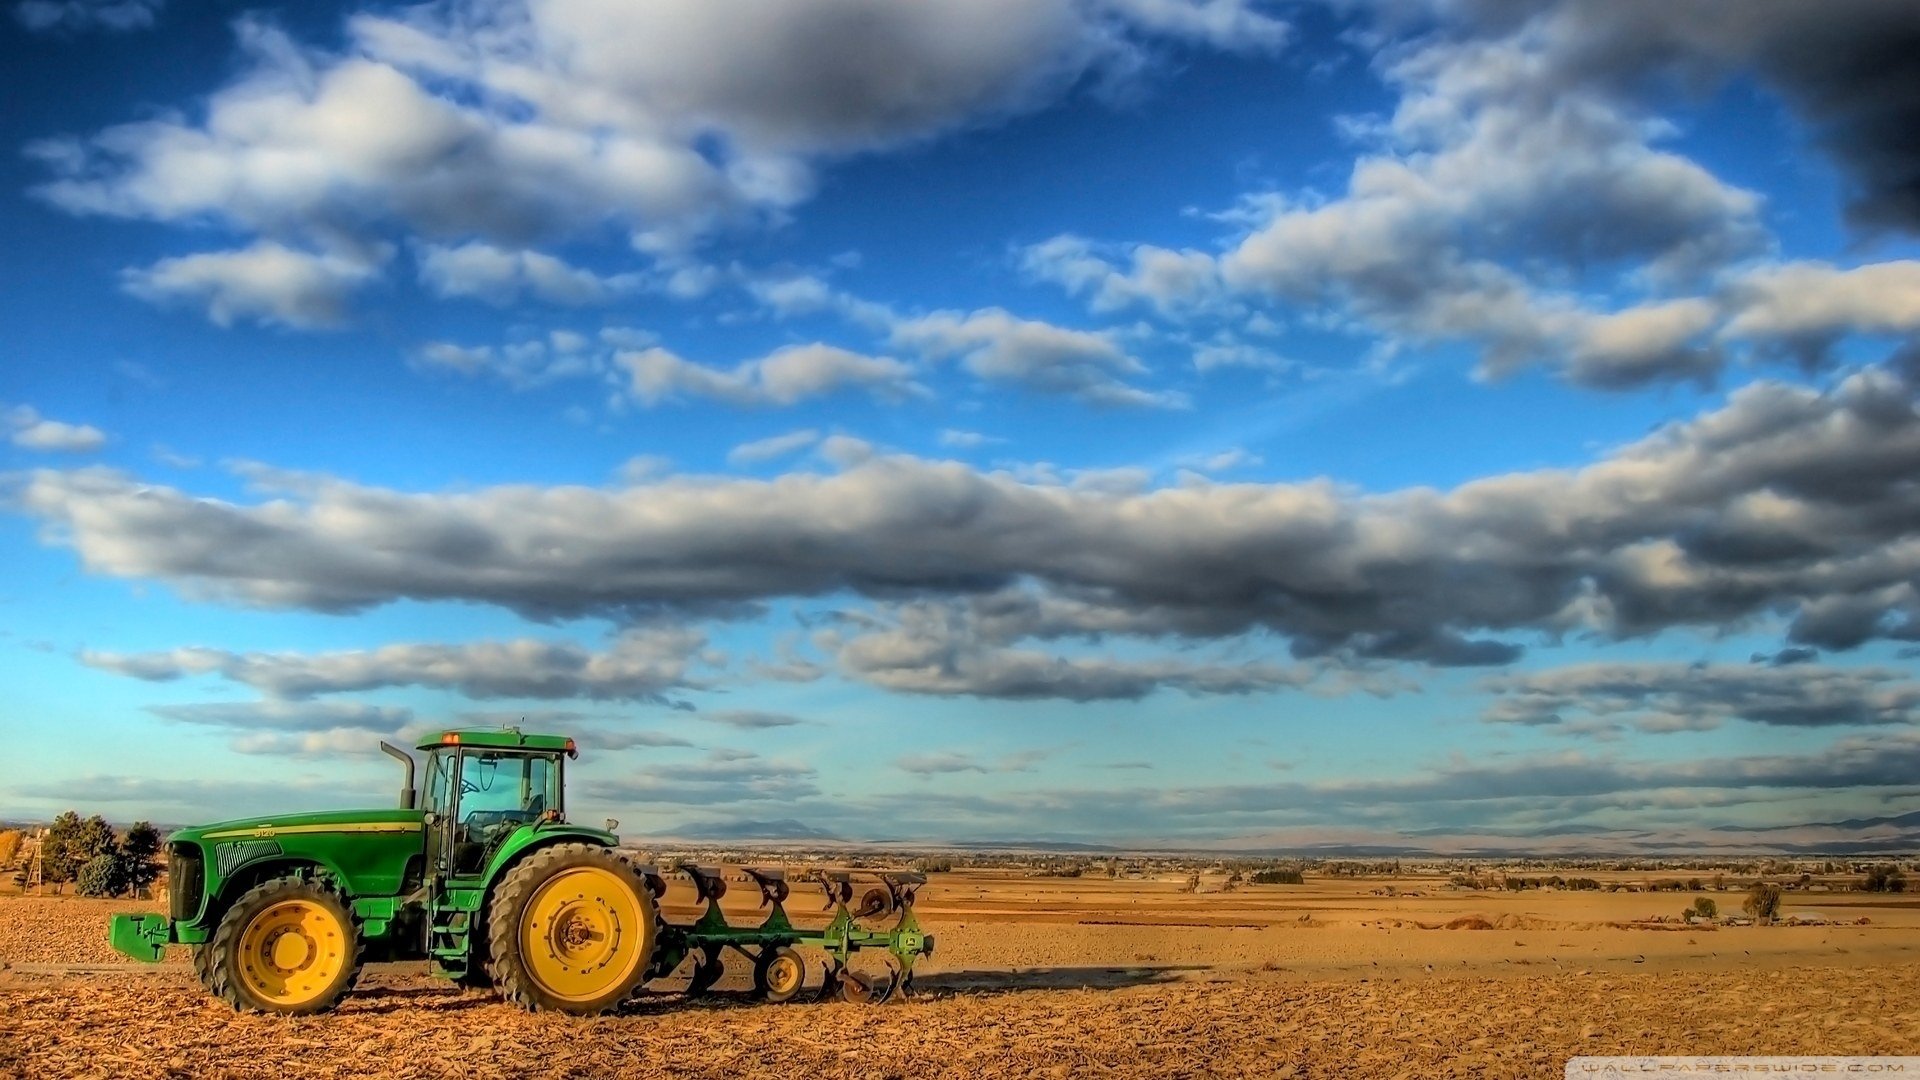 Download hd 1920x1080 John Deere PC background ID:482685 for free